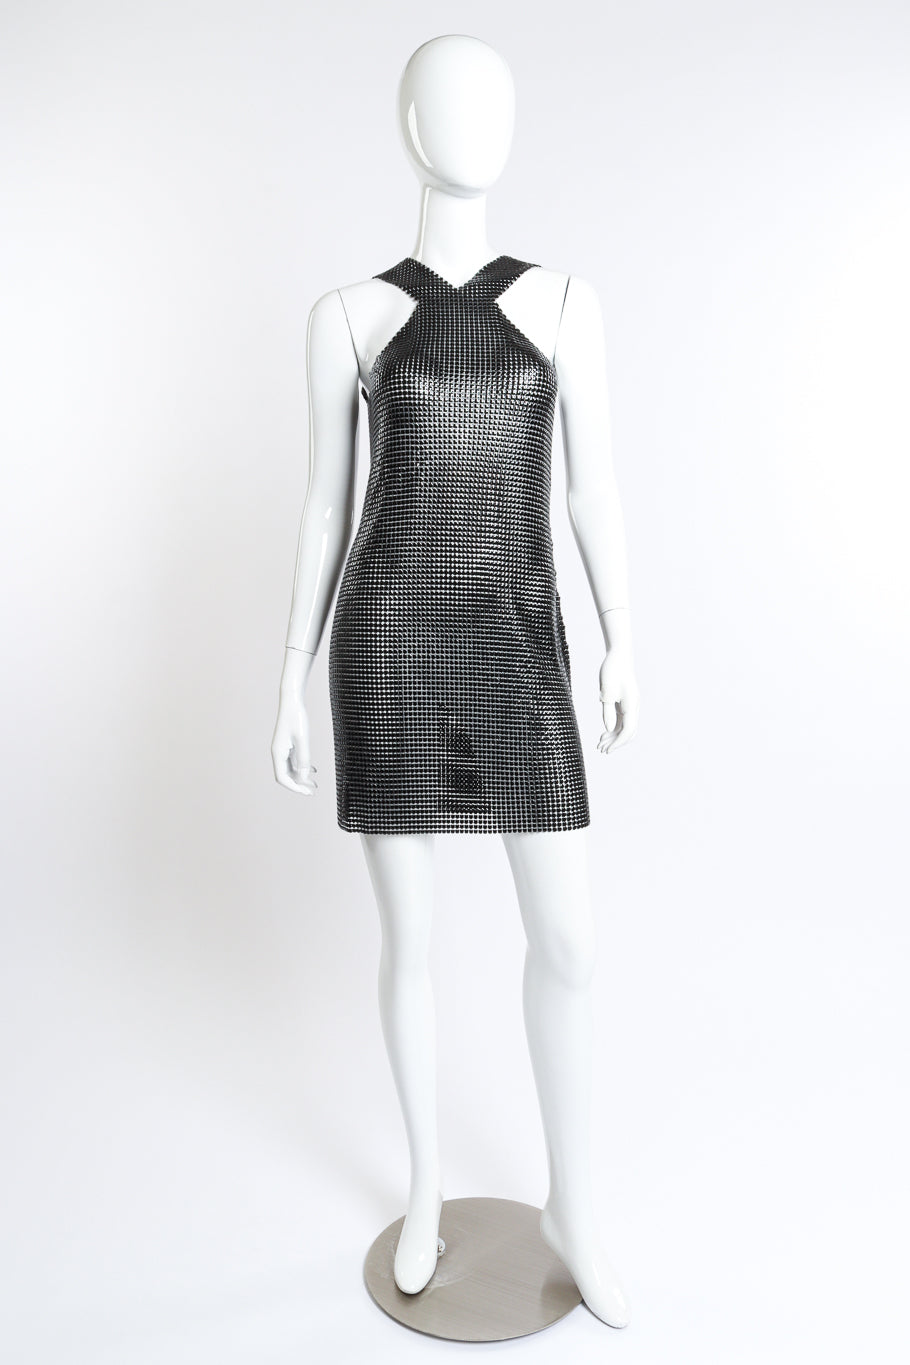 Paco Rabanne Racer Front Chainmail Dress front on mannequin @recess la